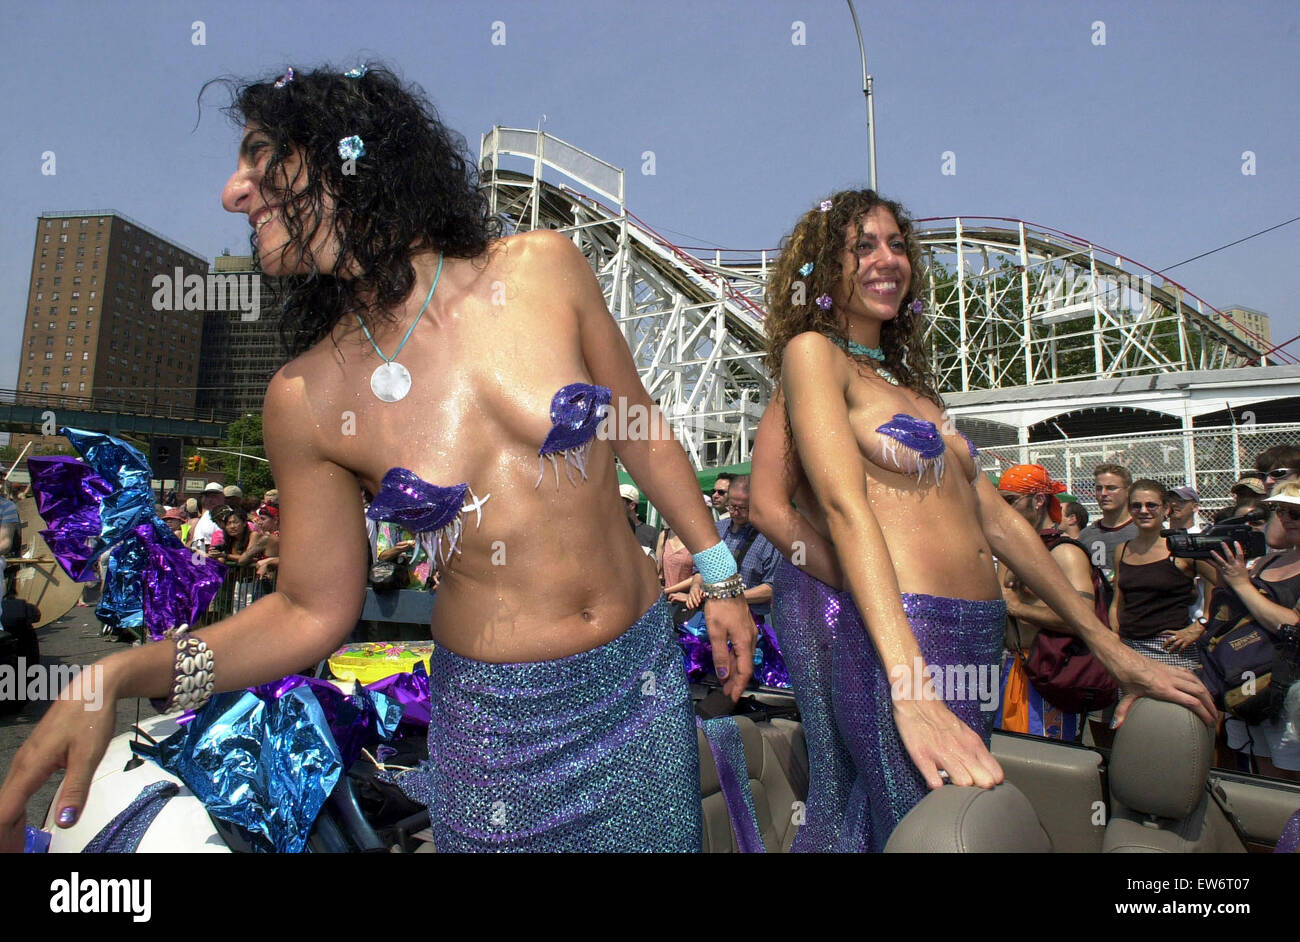 Jen Cohen (L) and  Elizabeth Gabbay (R) frolic in The Mermaid Parade in famed Coney Island on Surf Avenue on June 22, 2002.  The parade,  which celebrates the coming of the Summer Season brings outs eccentrics, exhibitionists and just plain old folk in their finest Mermaid, Merman and sometimes unrecognizable costumes.  (© Frances M. Roberts) Stock Photo